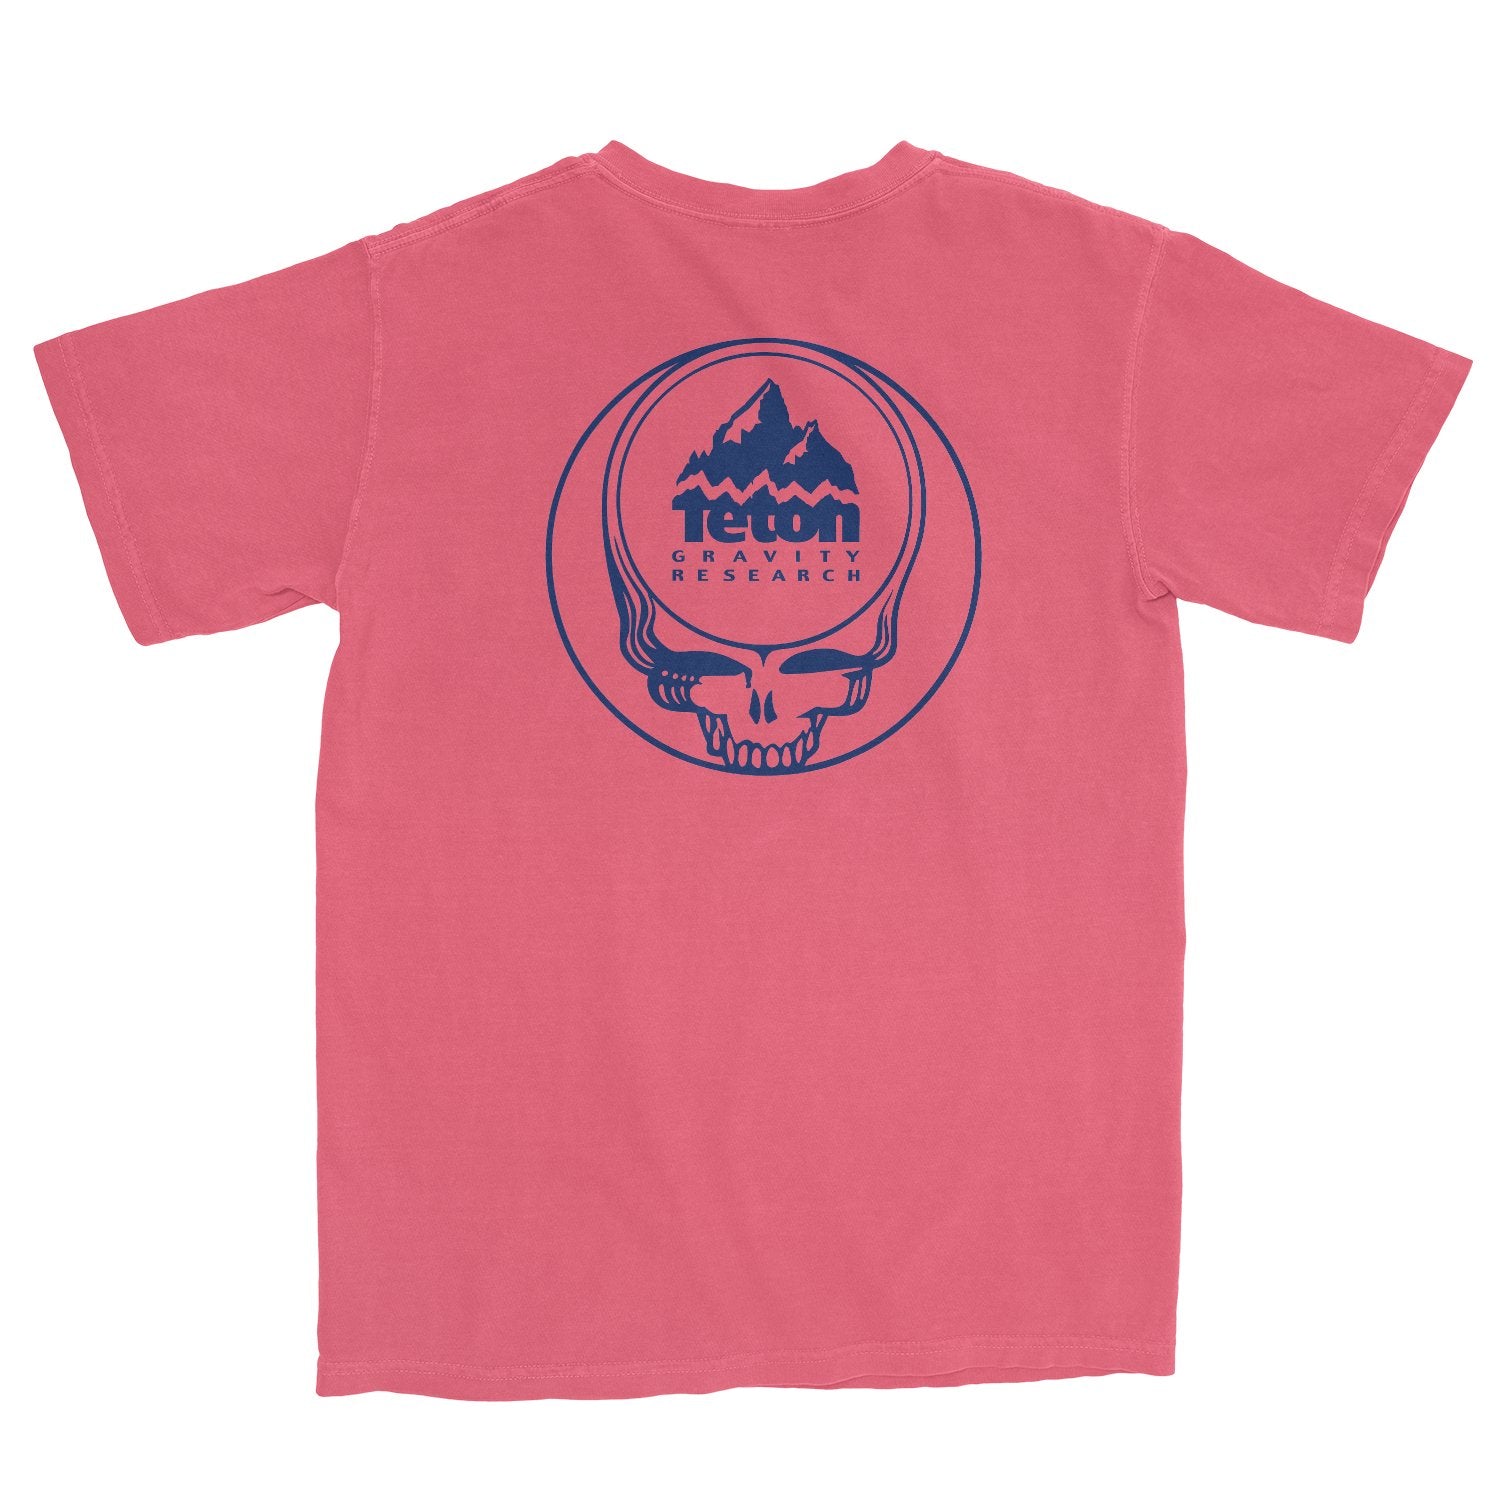 Grateful Dead x TGR Steal Your Face Tee - Teton Gravity Research